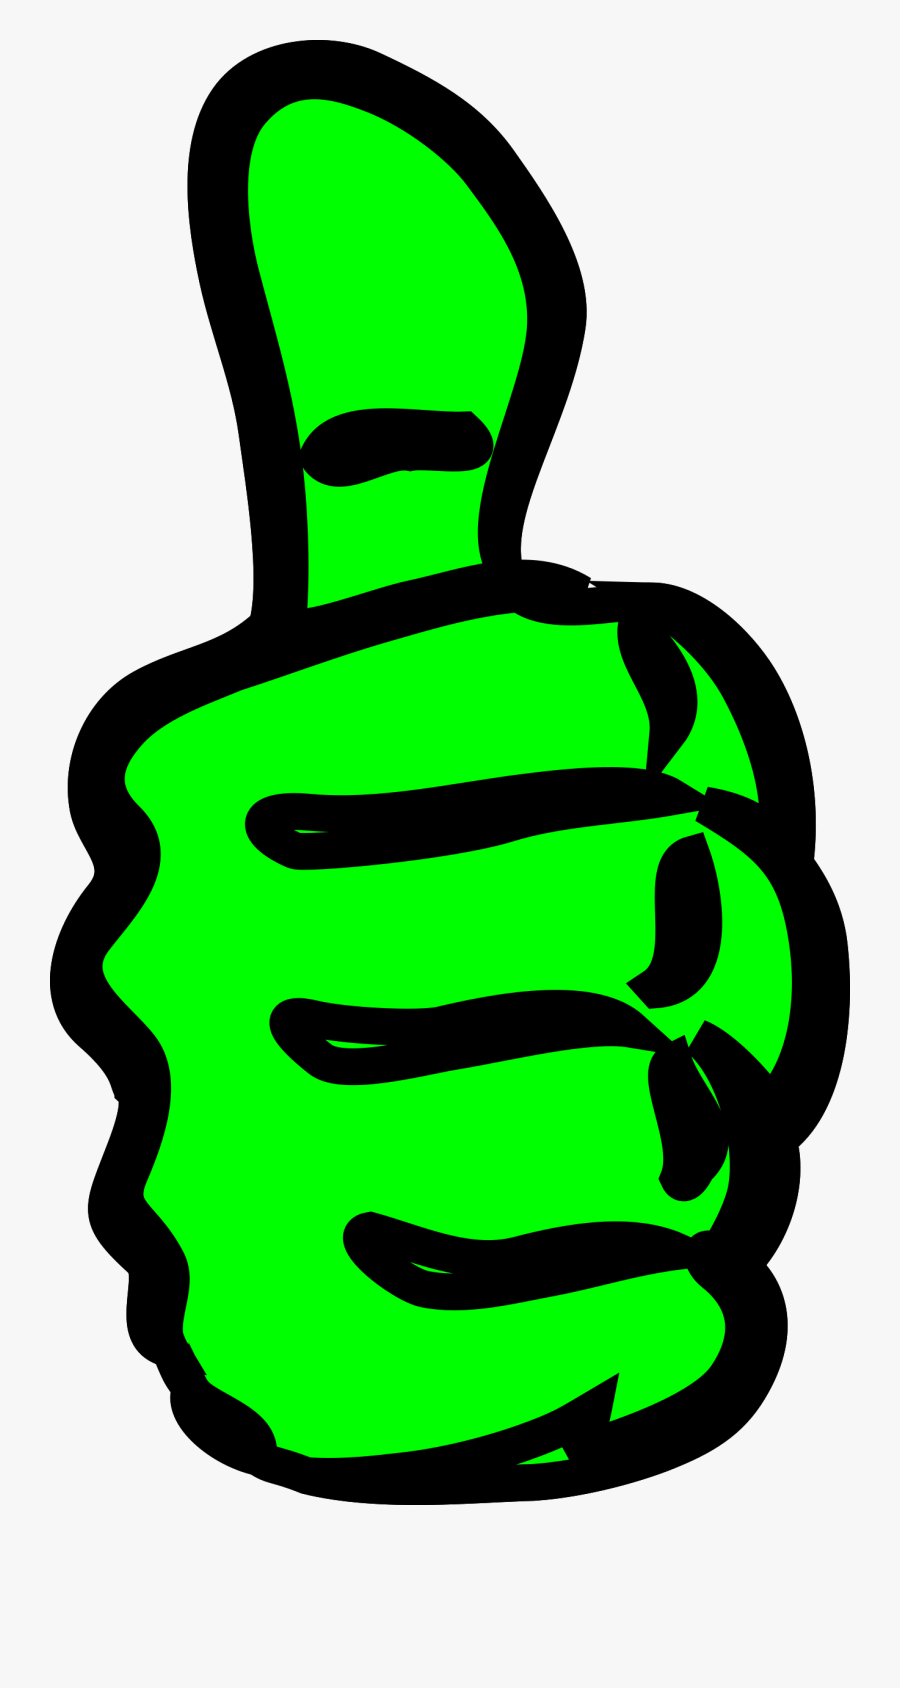 Thumbs Up Clipart, Transparent Clipart